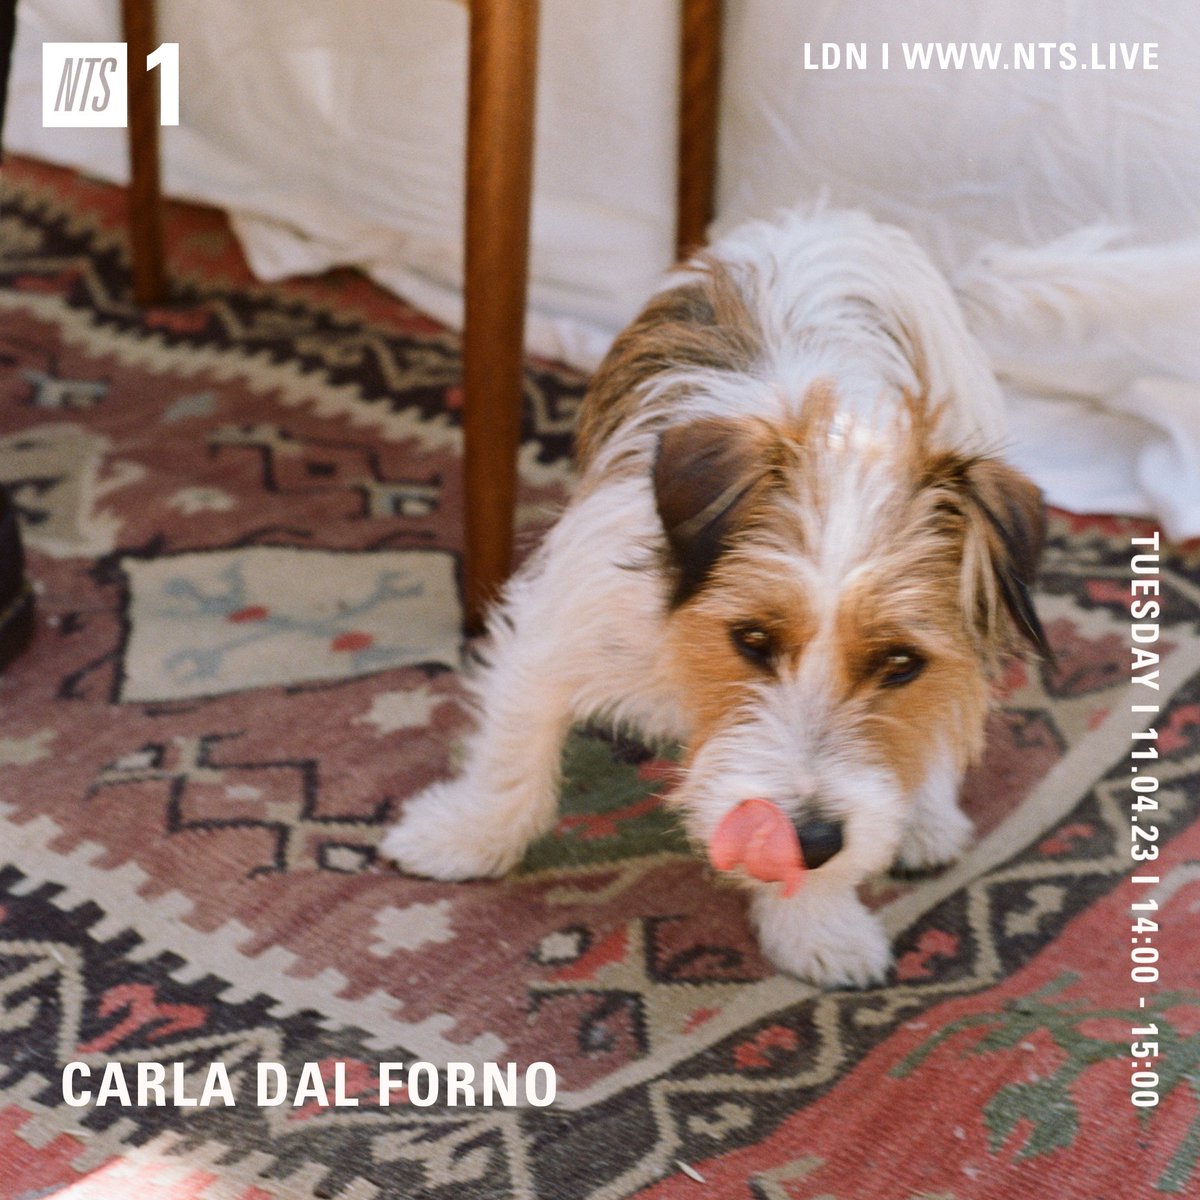 Dub for dogs on today's @NTSlive show